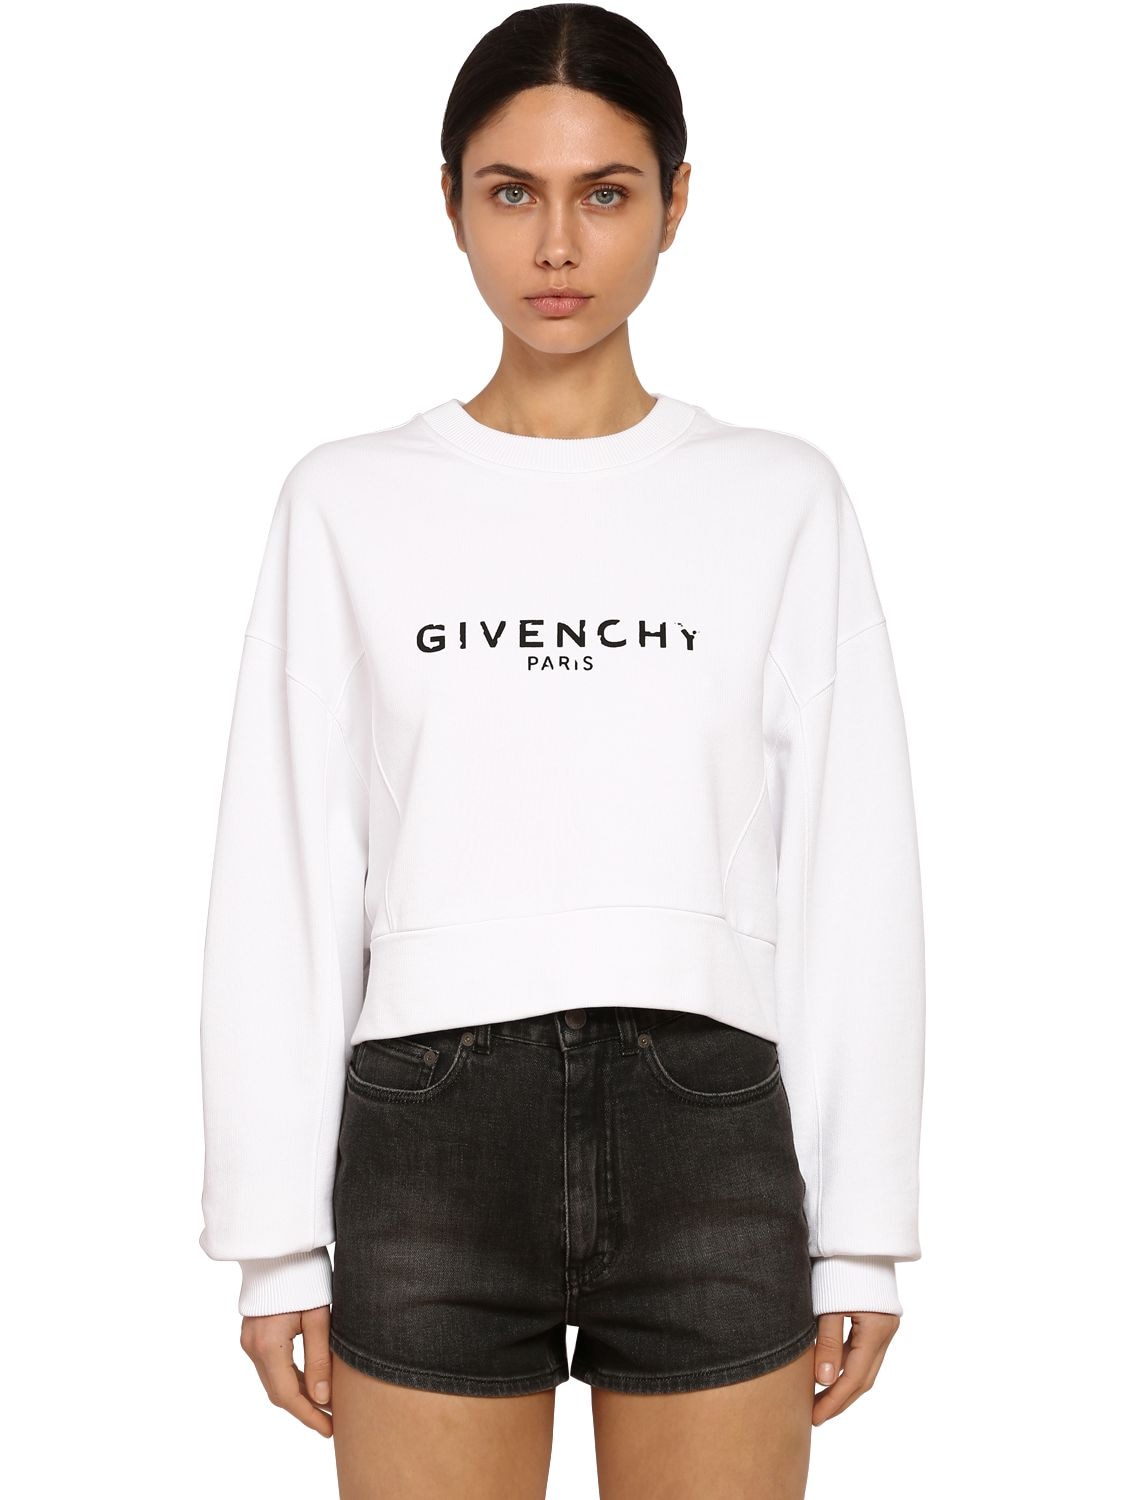 GIVENCHY DESTROYED LOGO纯棉平纹针织卫衣,70IA7M014-MTAW0